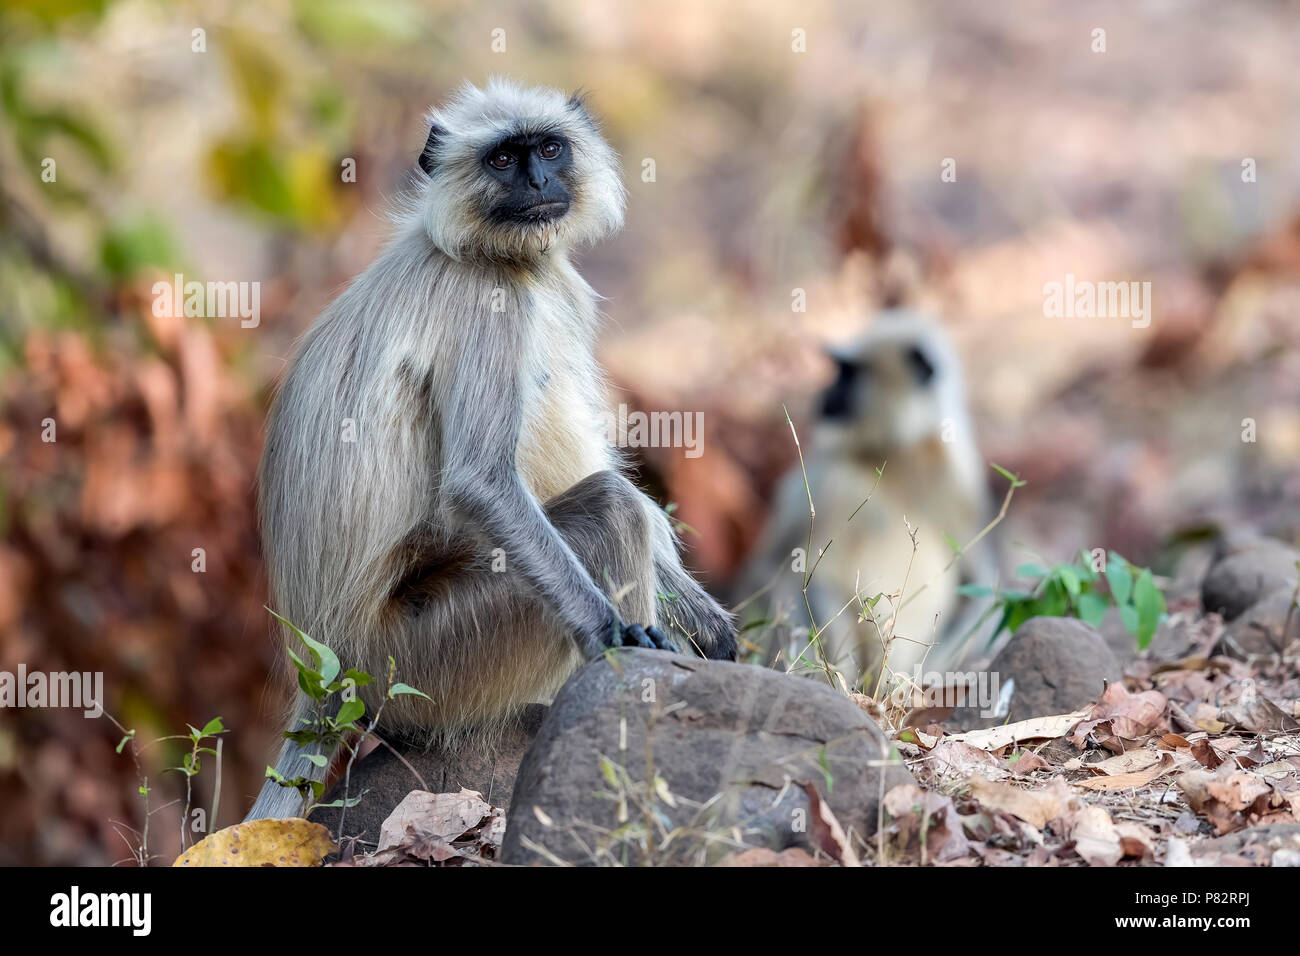 Adult Northern Plains Langur sitting on a track in Bandavgarh NP, India. March 2017. Stock Photo